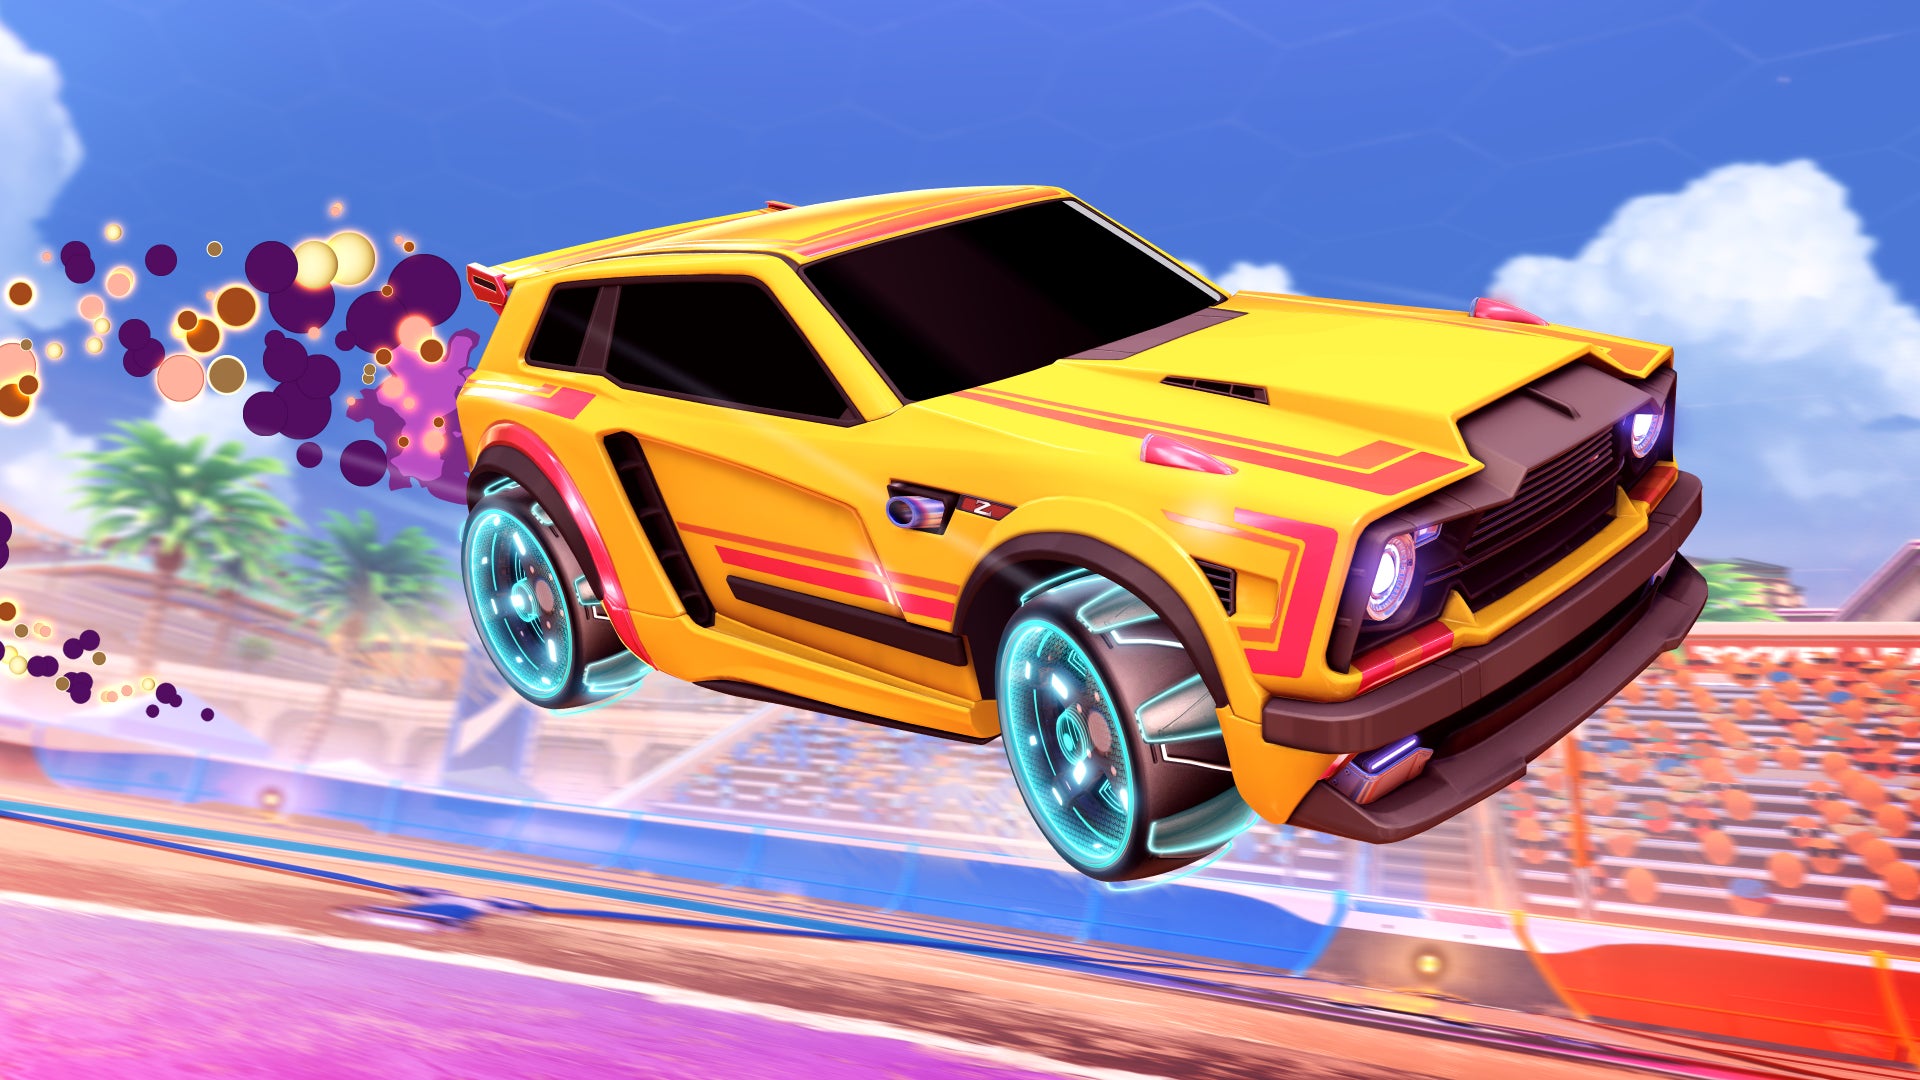 Totally Awesome Crate drops during Radical Summer Image